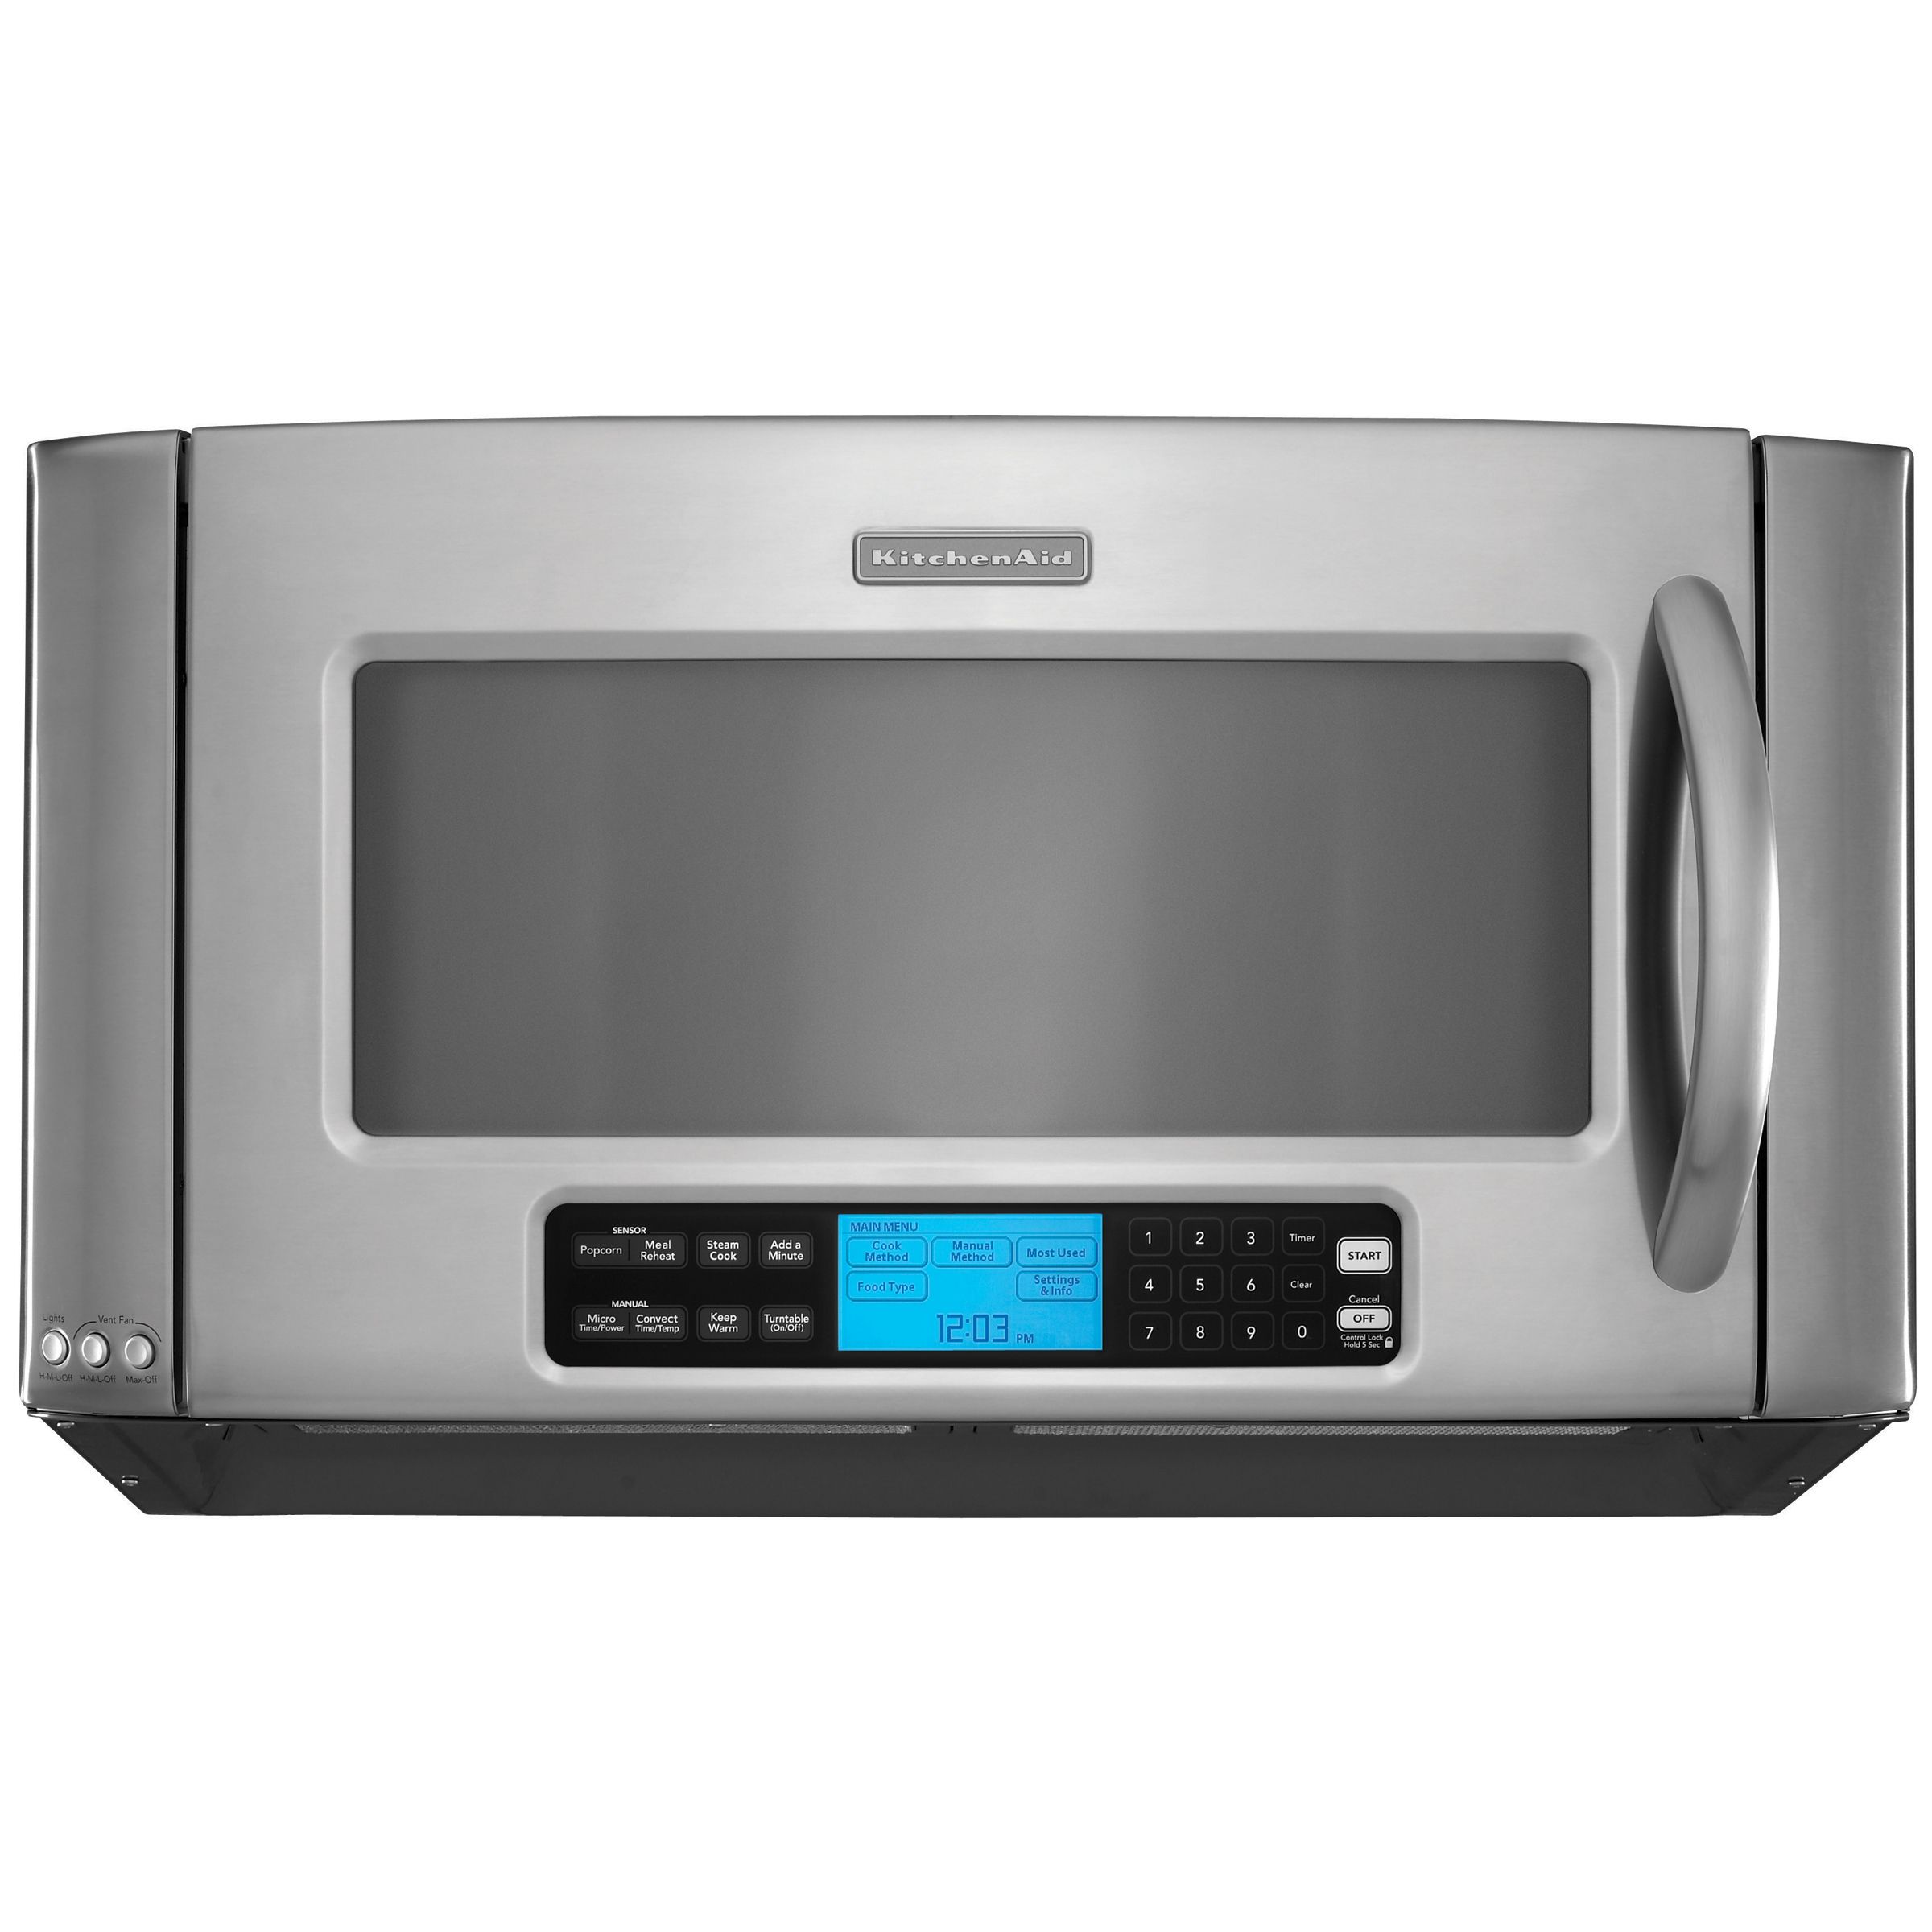 KitchenAid 30 2.0 cu. ft. Microhood/Convection Microwave Oven Stainless steel